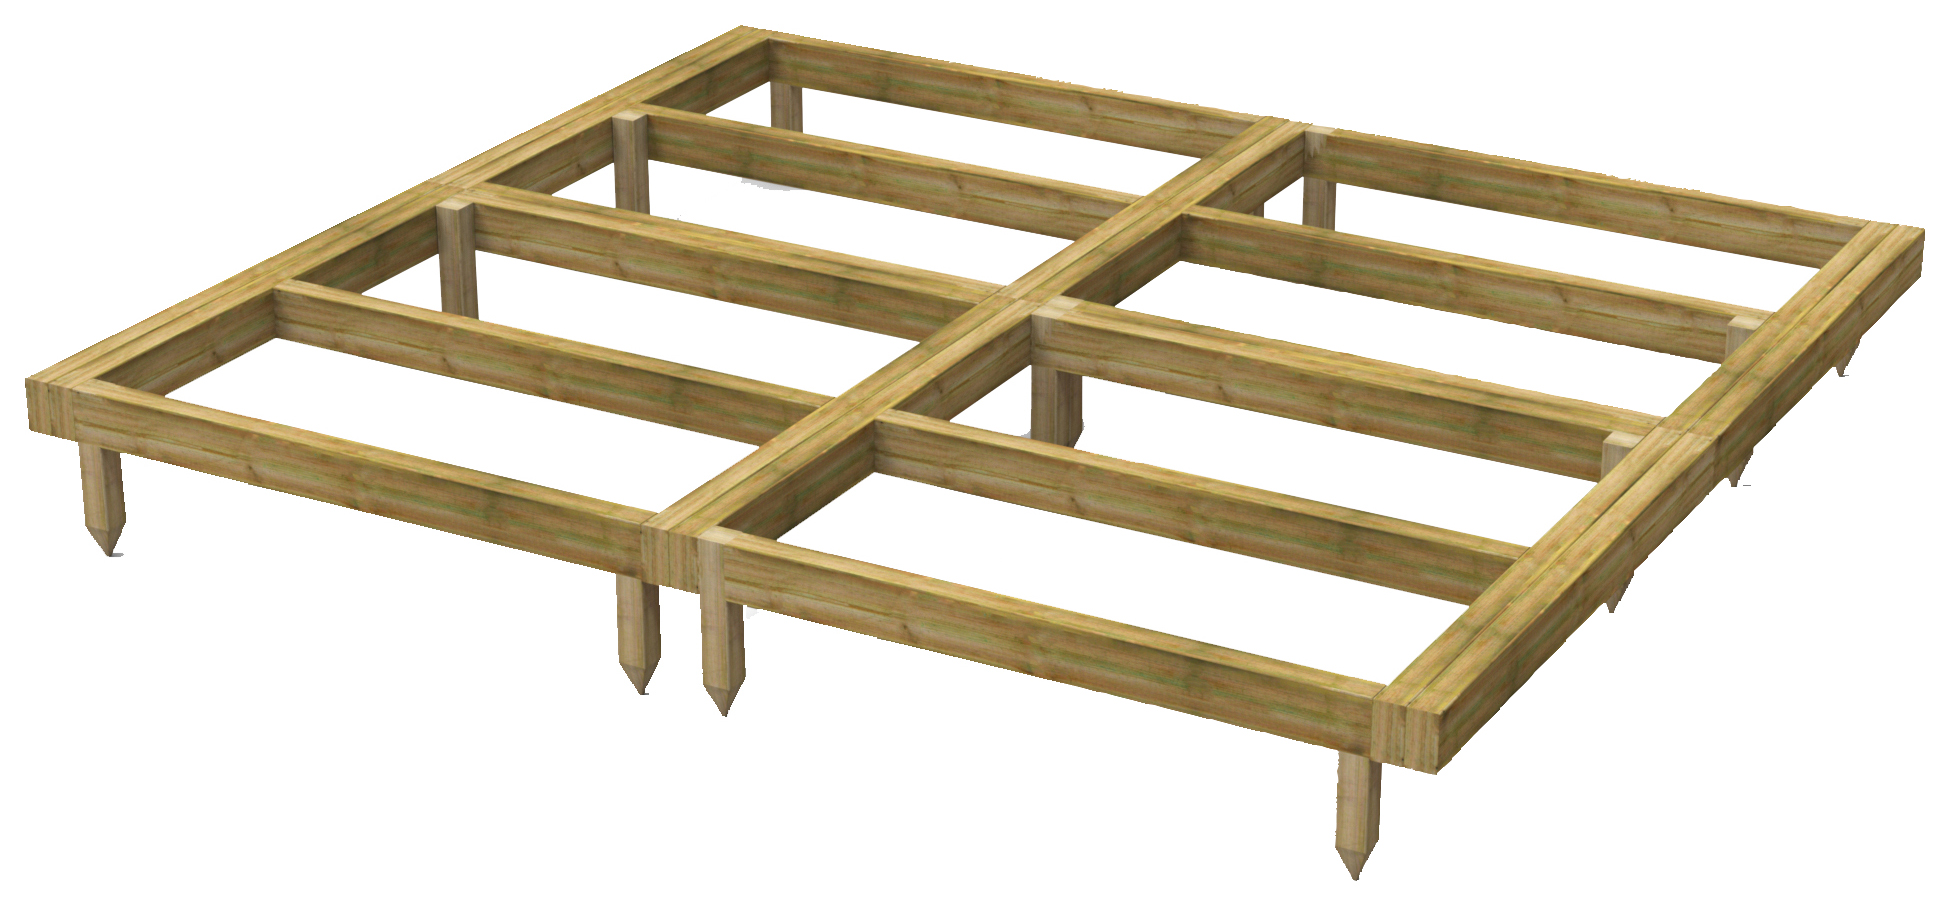 Power Sheds Pressure Treated Garden Building Base Kit - 8 x 8ft